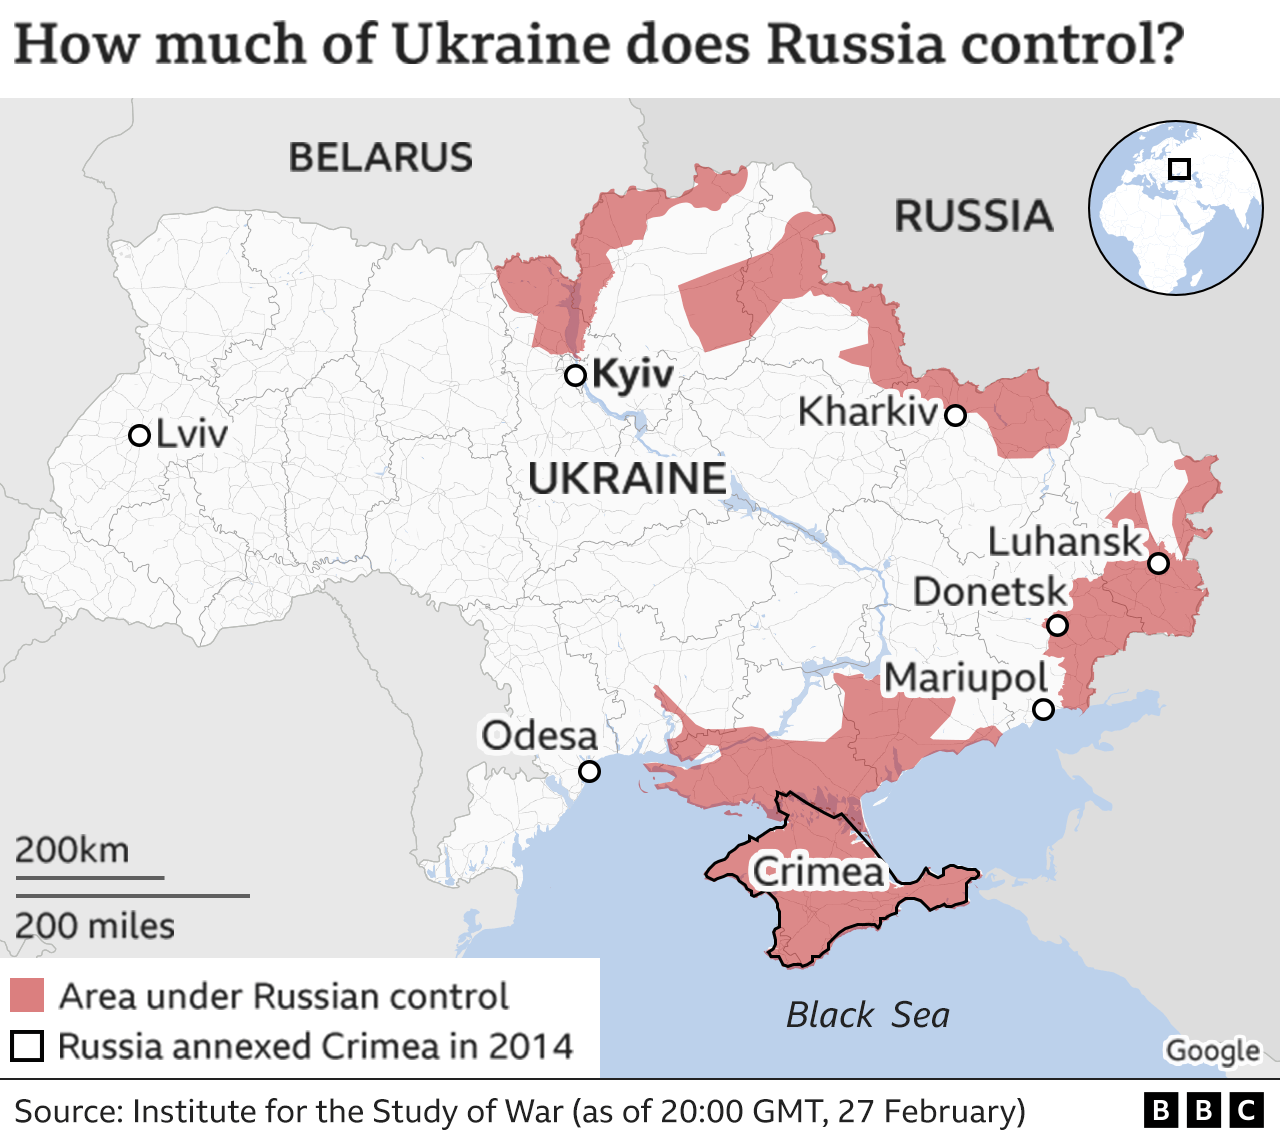 https://ichef.bbci.co.uk/news/976/cpsprodpb/1C74/production/_123448270_ukraine_russian_control_areas_map_02_27_2100_2x640-nc.png